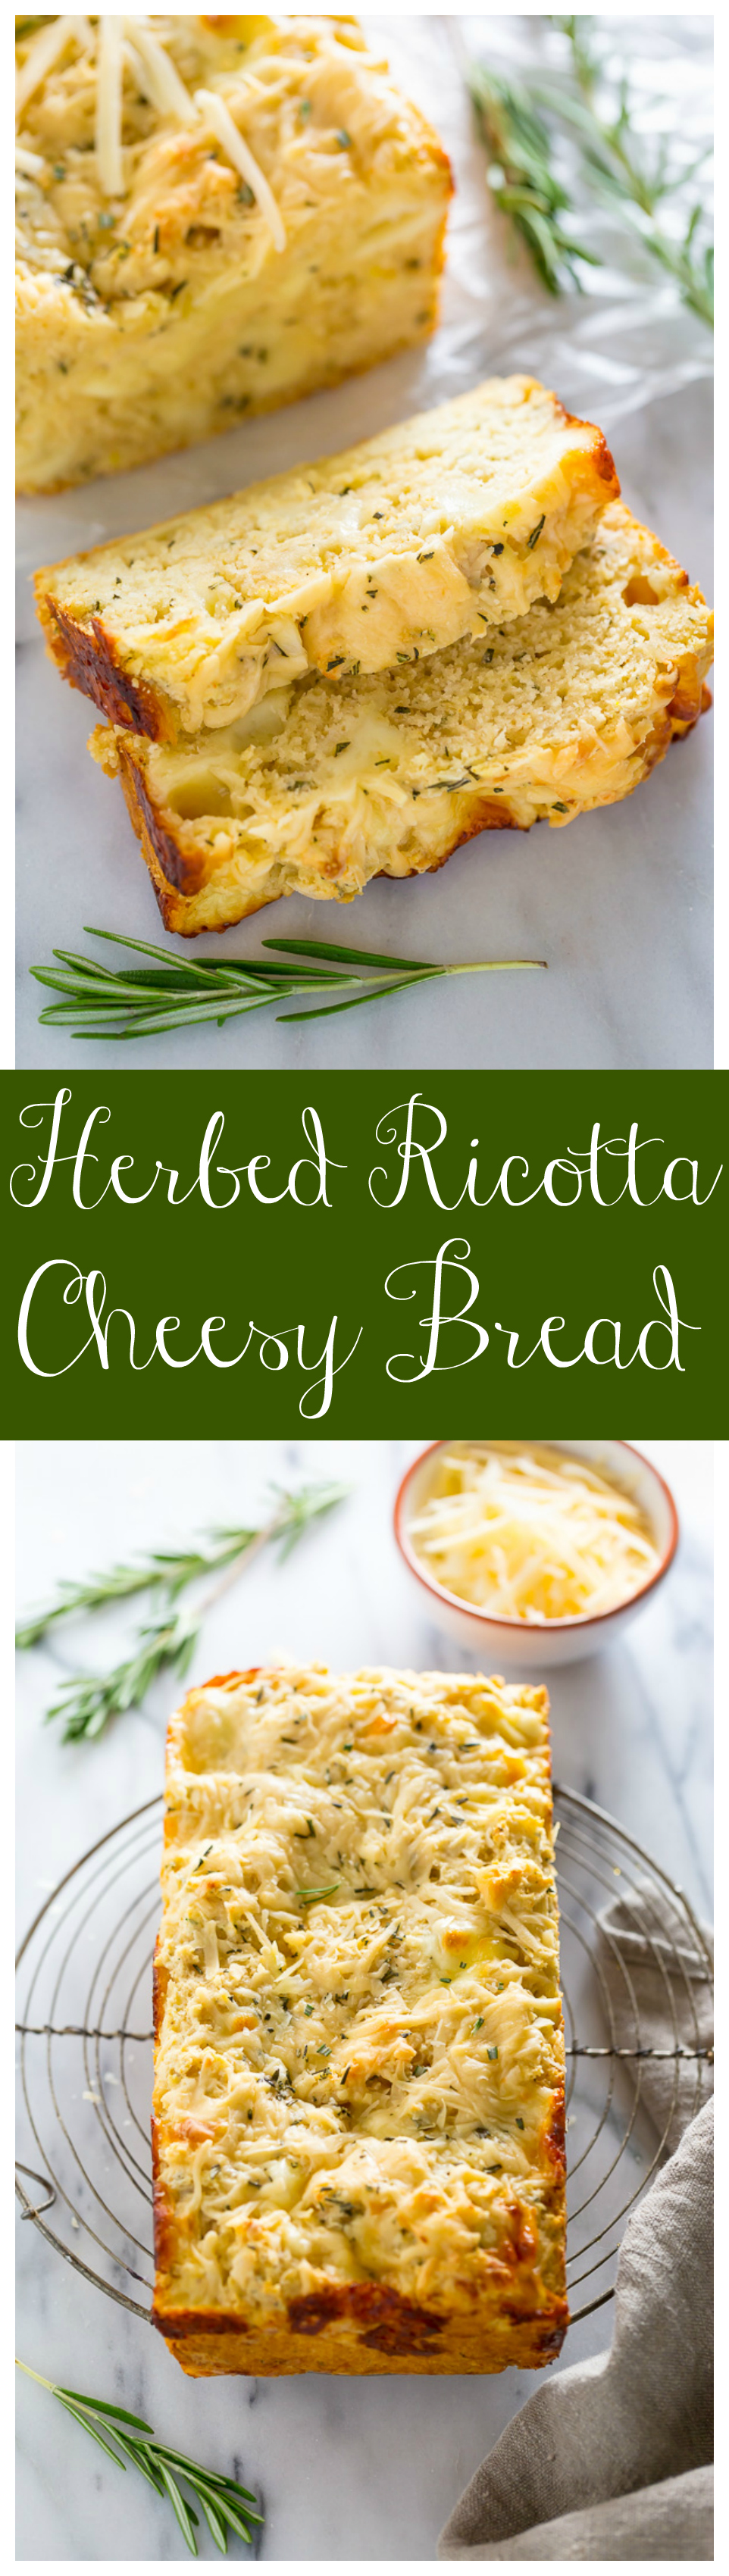 One-Bowl Herbed Ricotta Cheesy Bread - Baker by Nature